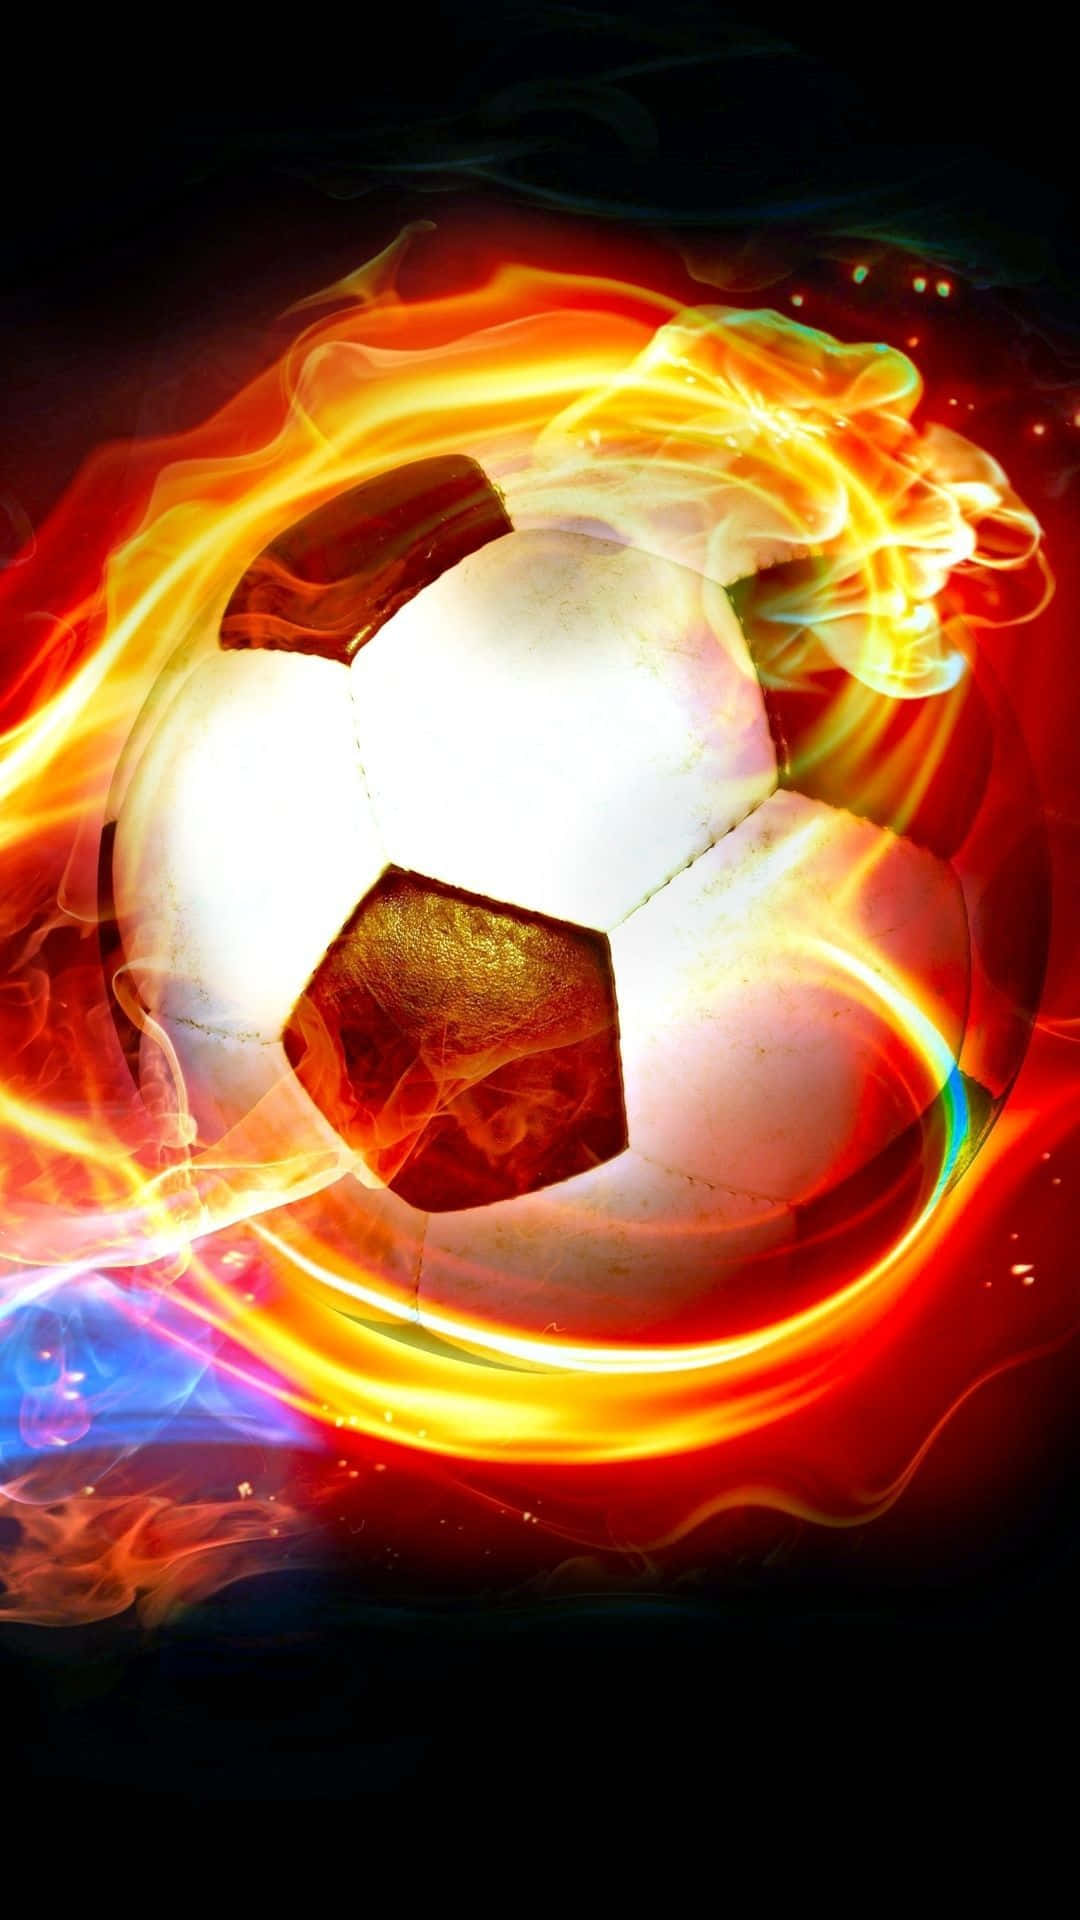 A Soccer Ball In Flames On A Black Background Background